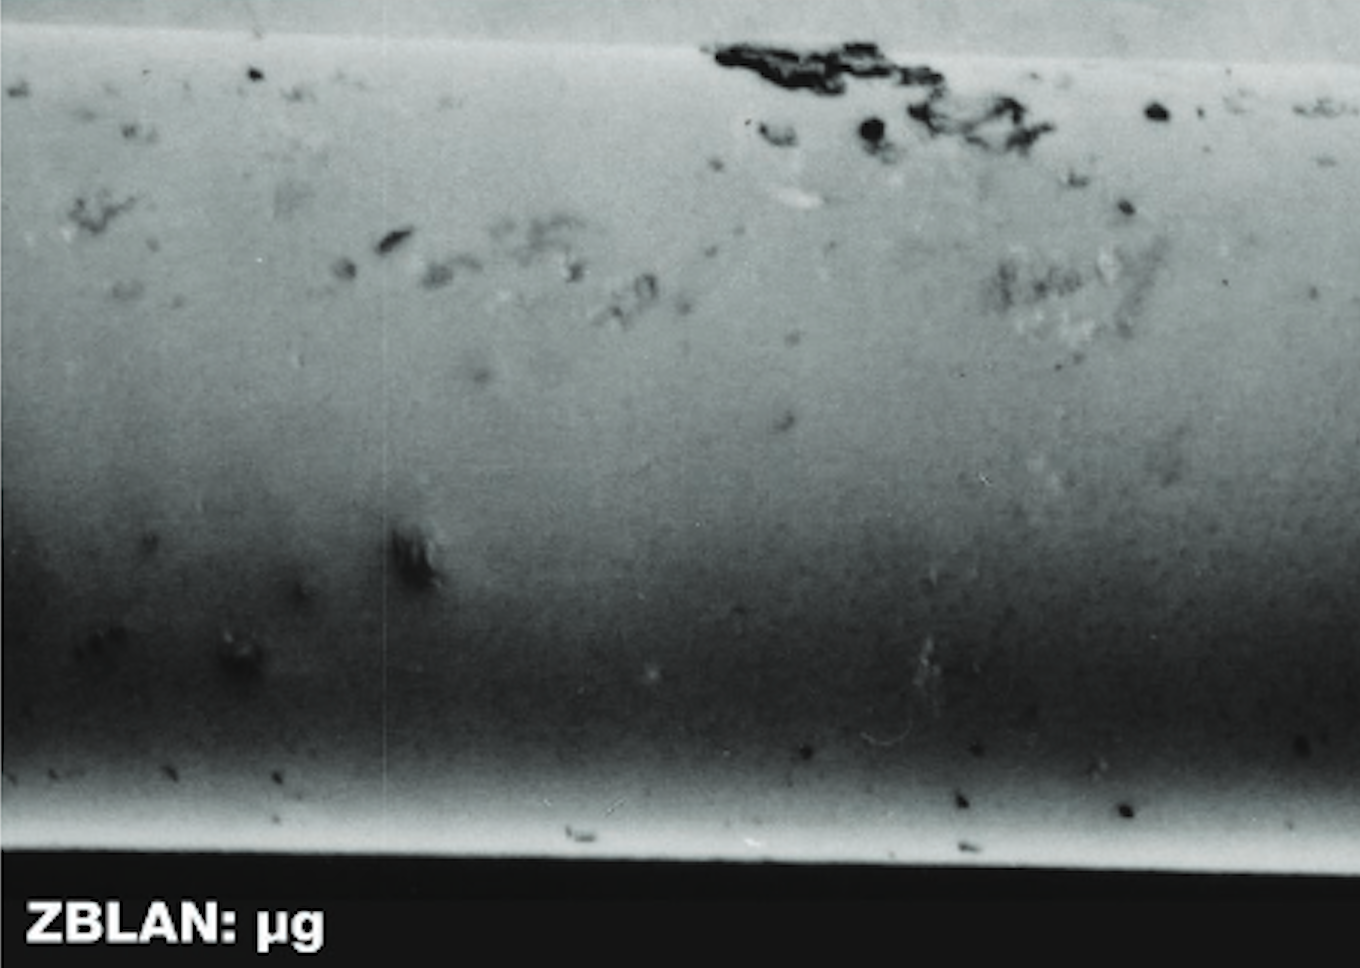 Microscopic view of smooth-surfaced ZBLAN optical fiber produced in microgravity.